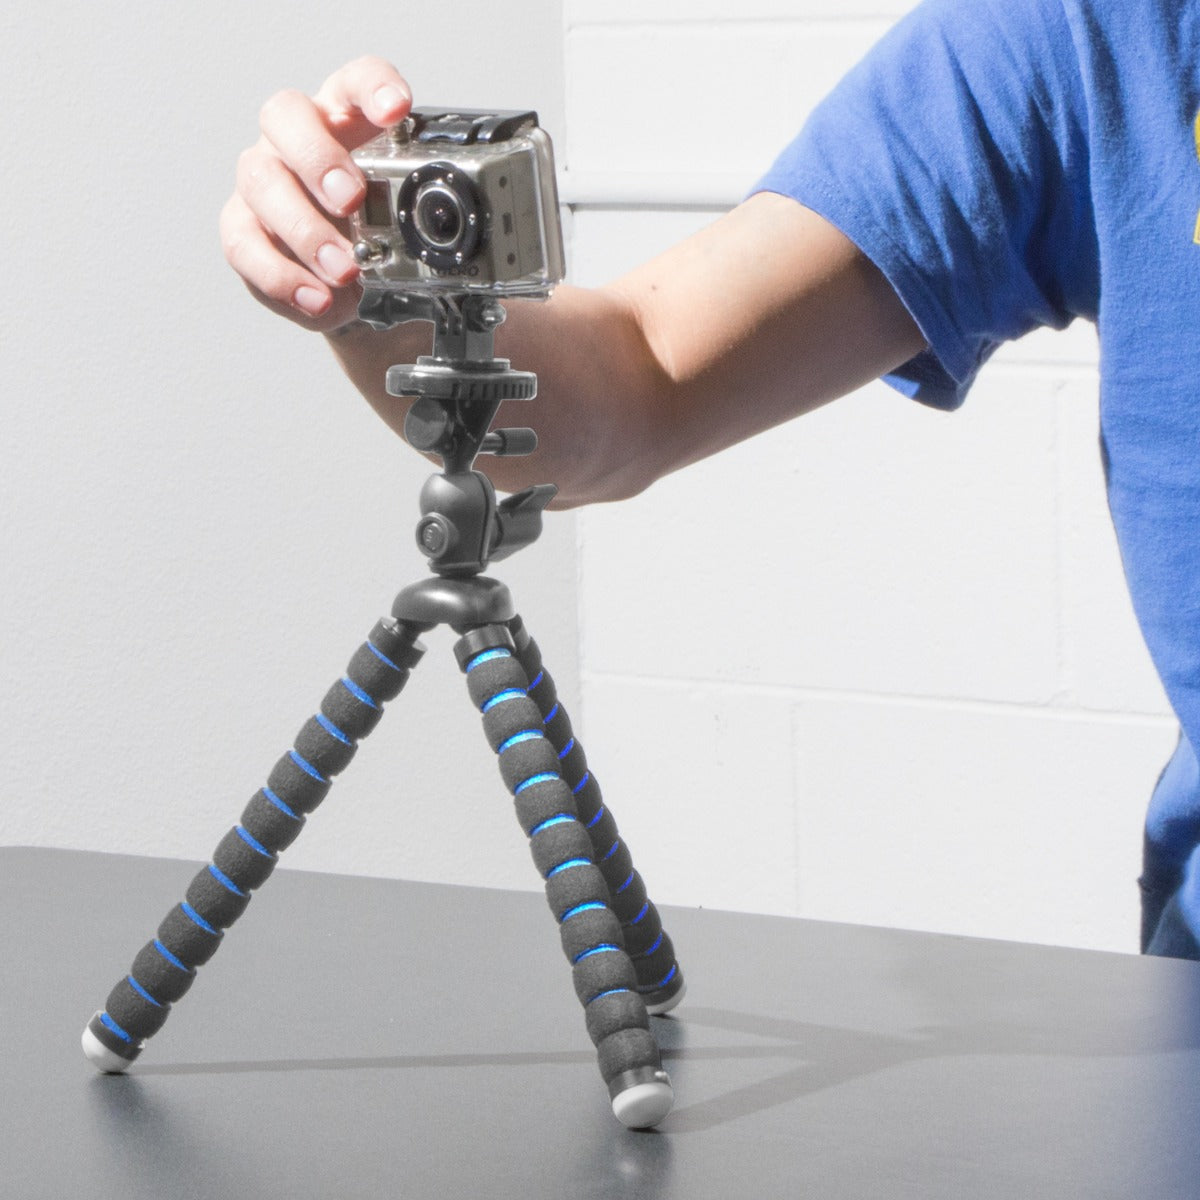 iBOLT Tripod miniPro XL Flexible 3-in-1 :11 inch Tripod for Smartphones, Cameras, and GoPros